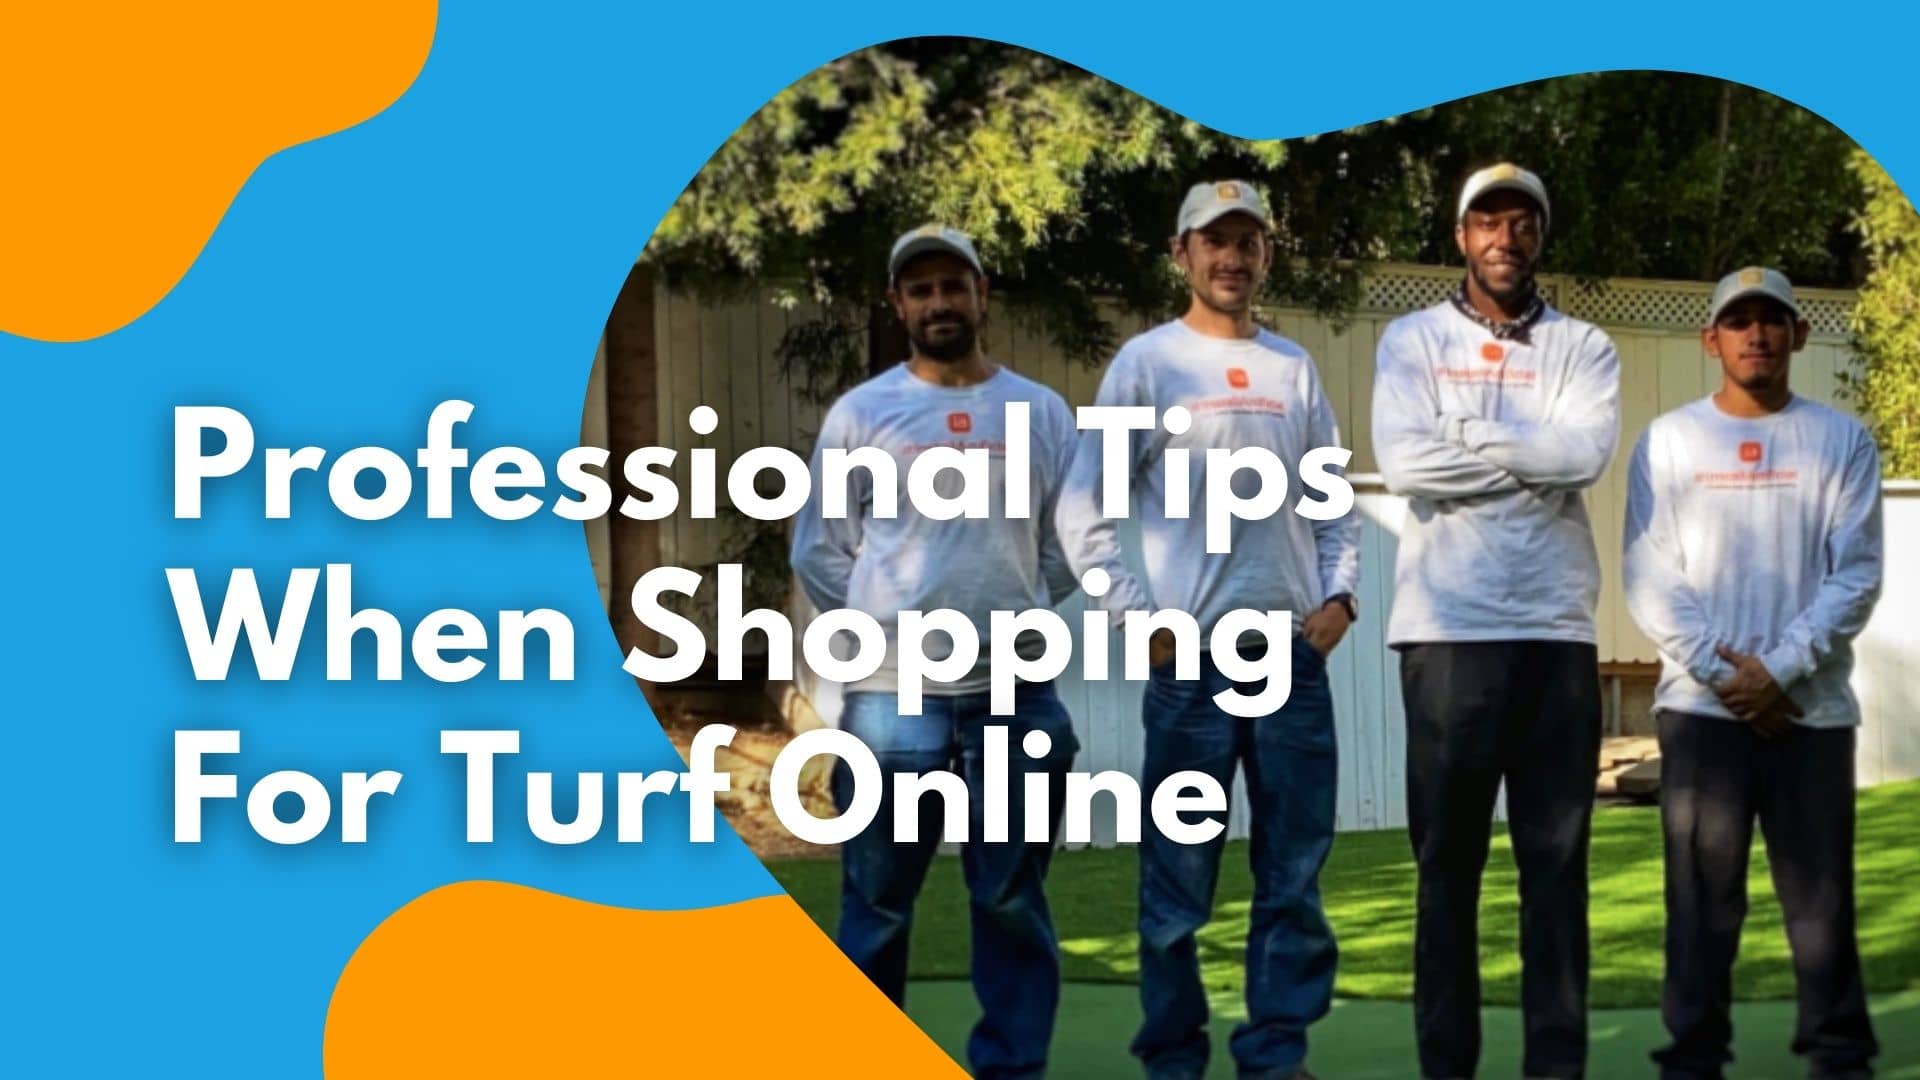 Professional Tips When Shopping For Turf Online